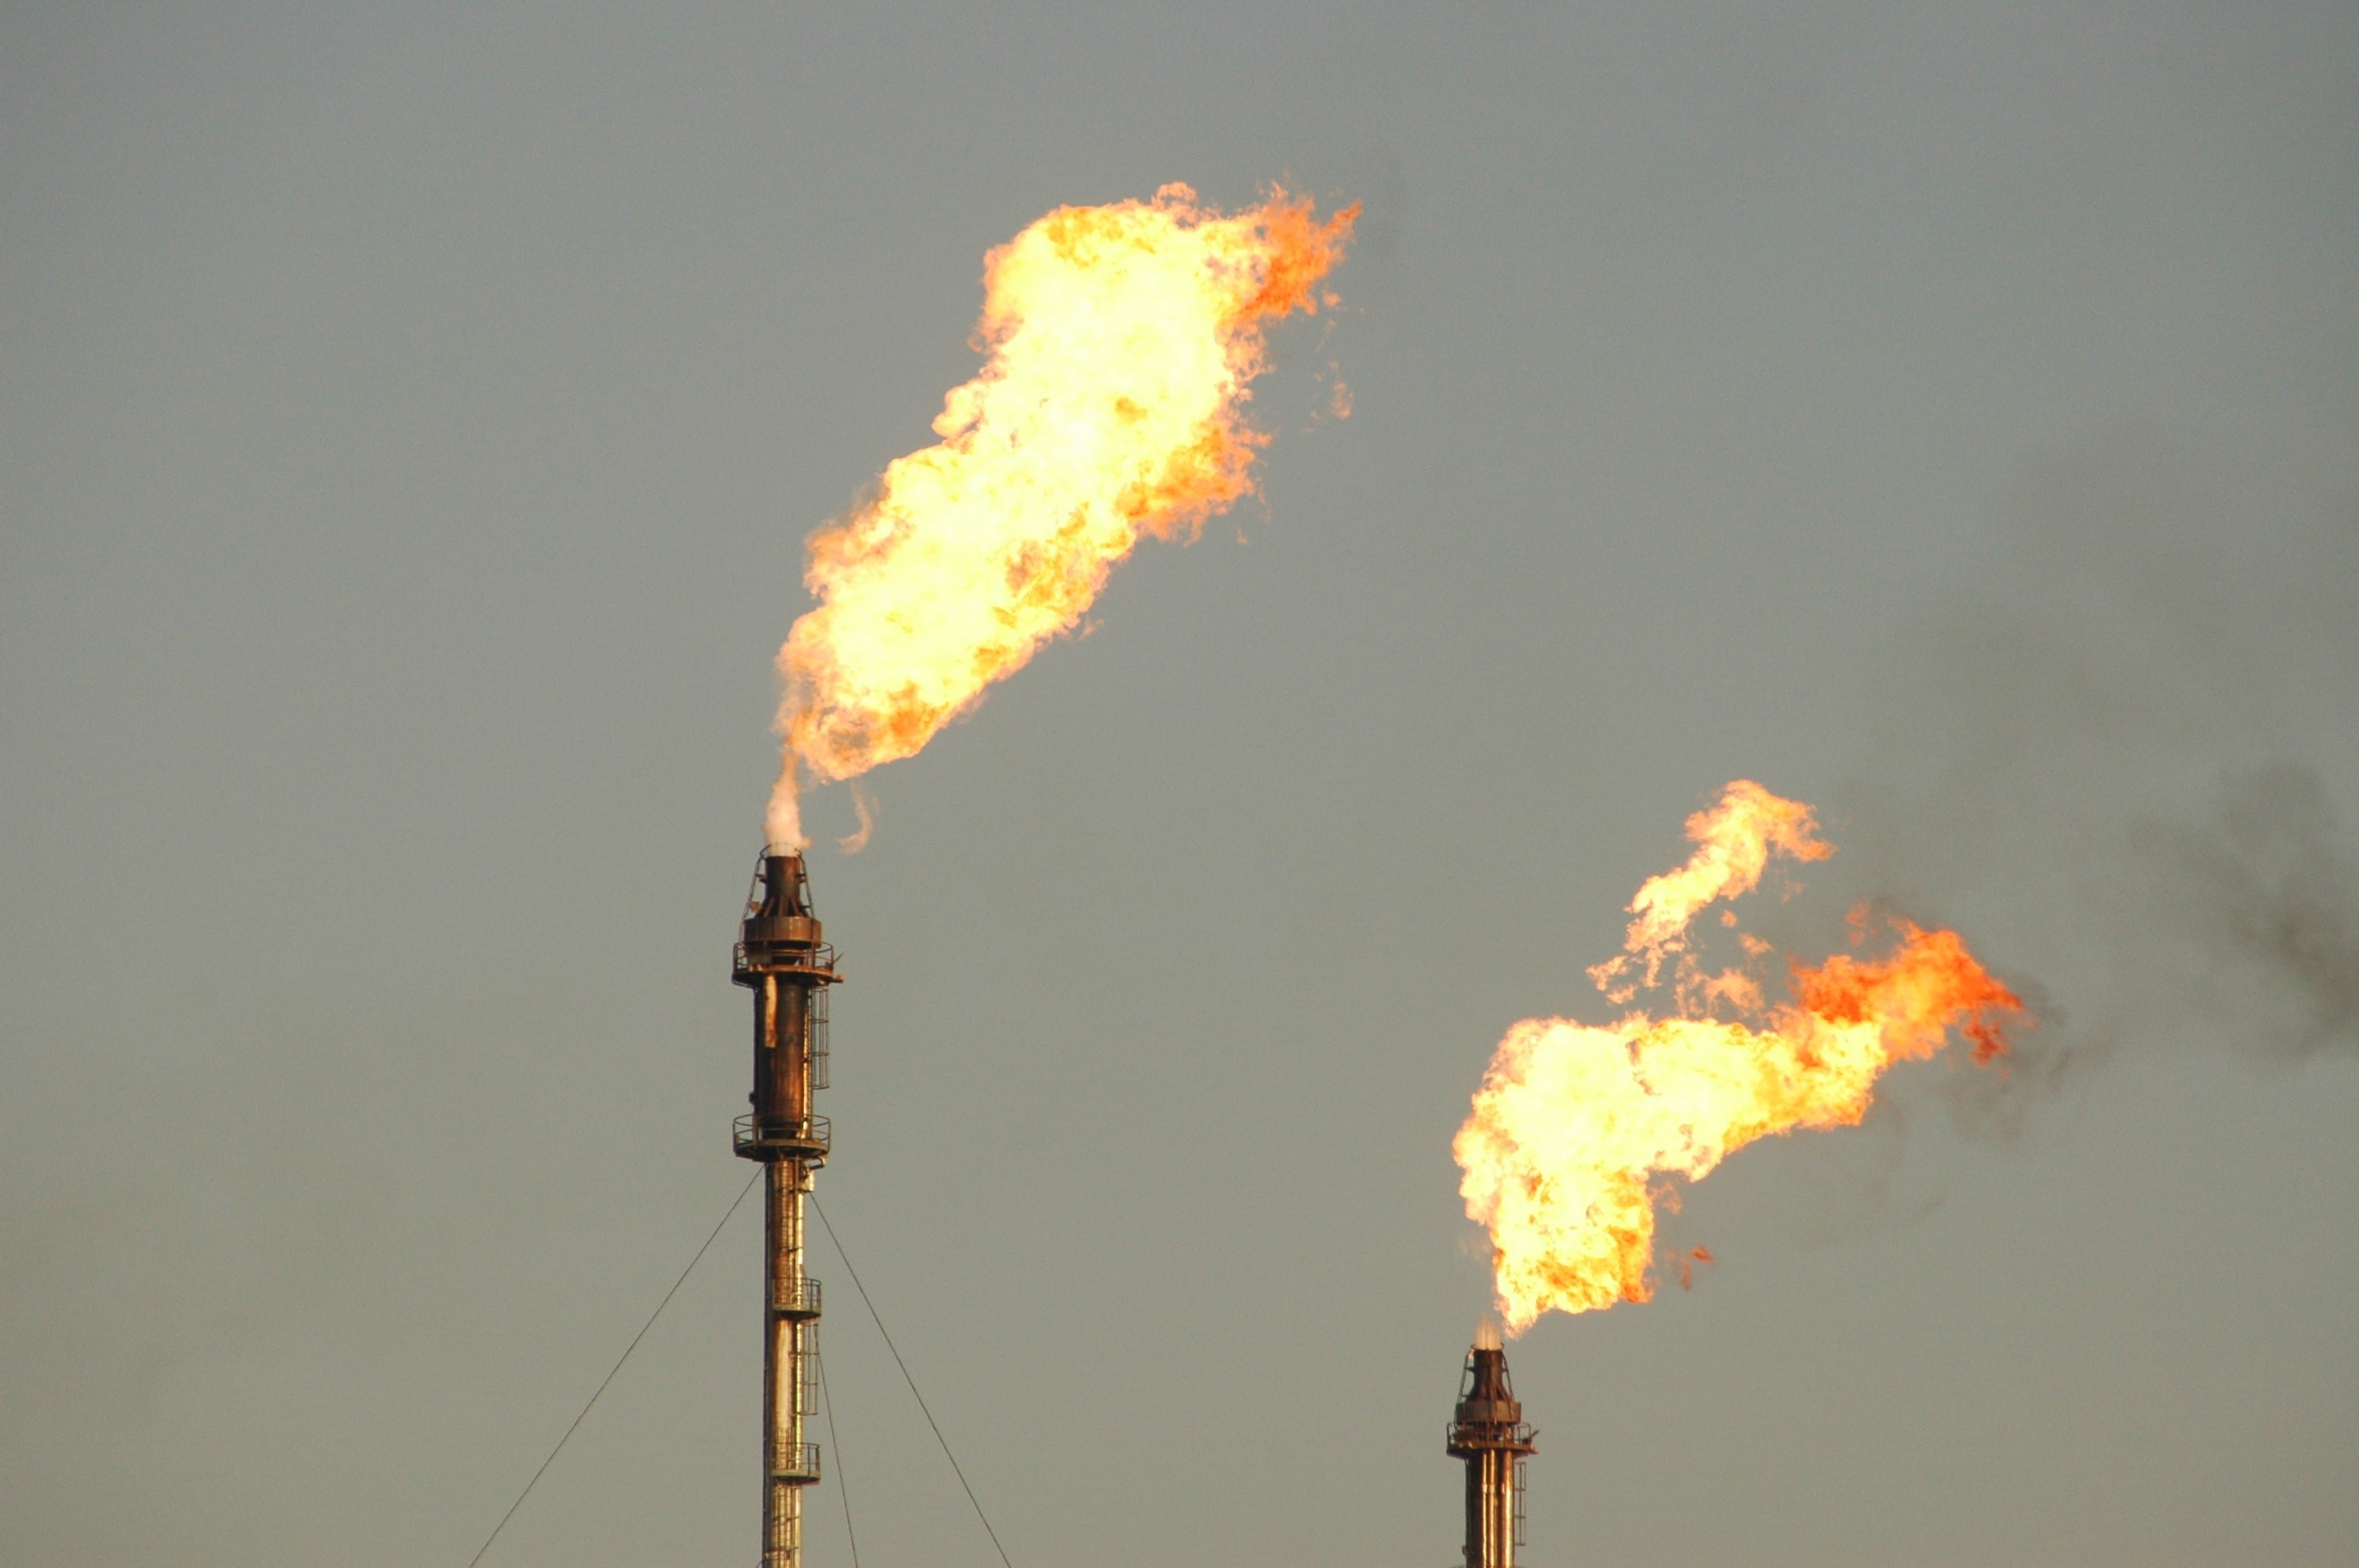 Gas Flaring in Forouzan Oilfield Coming to an End